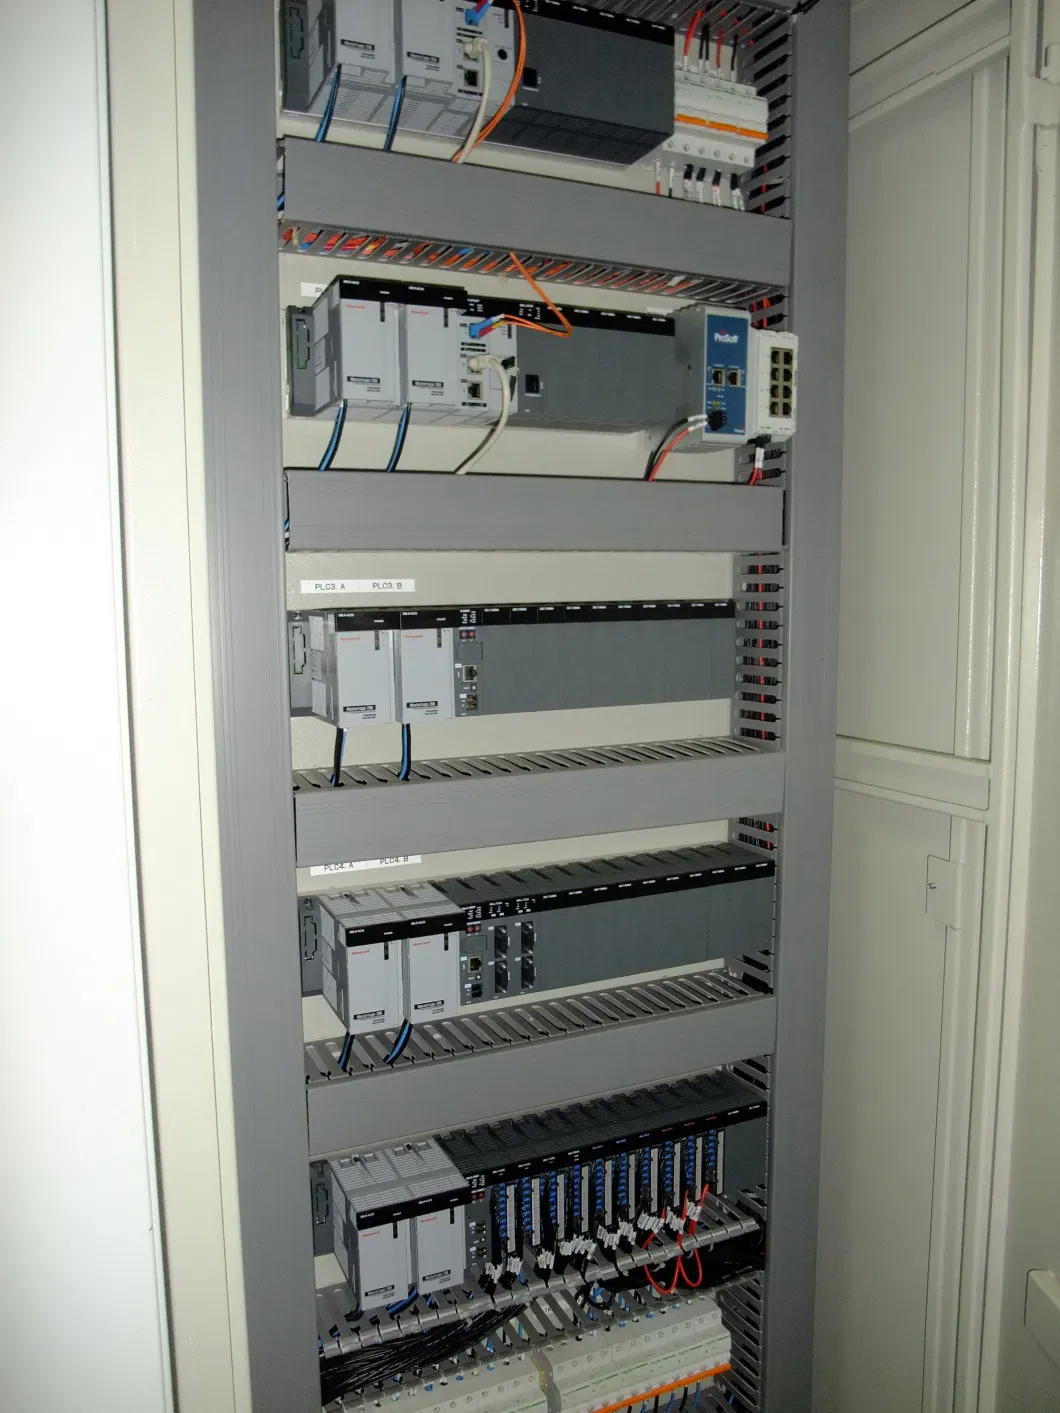 PLC Control Panel - PLC Programming for Industrial Automation